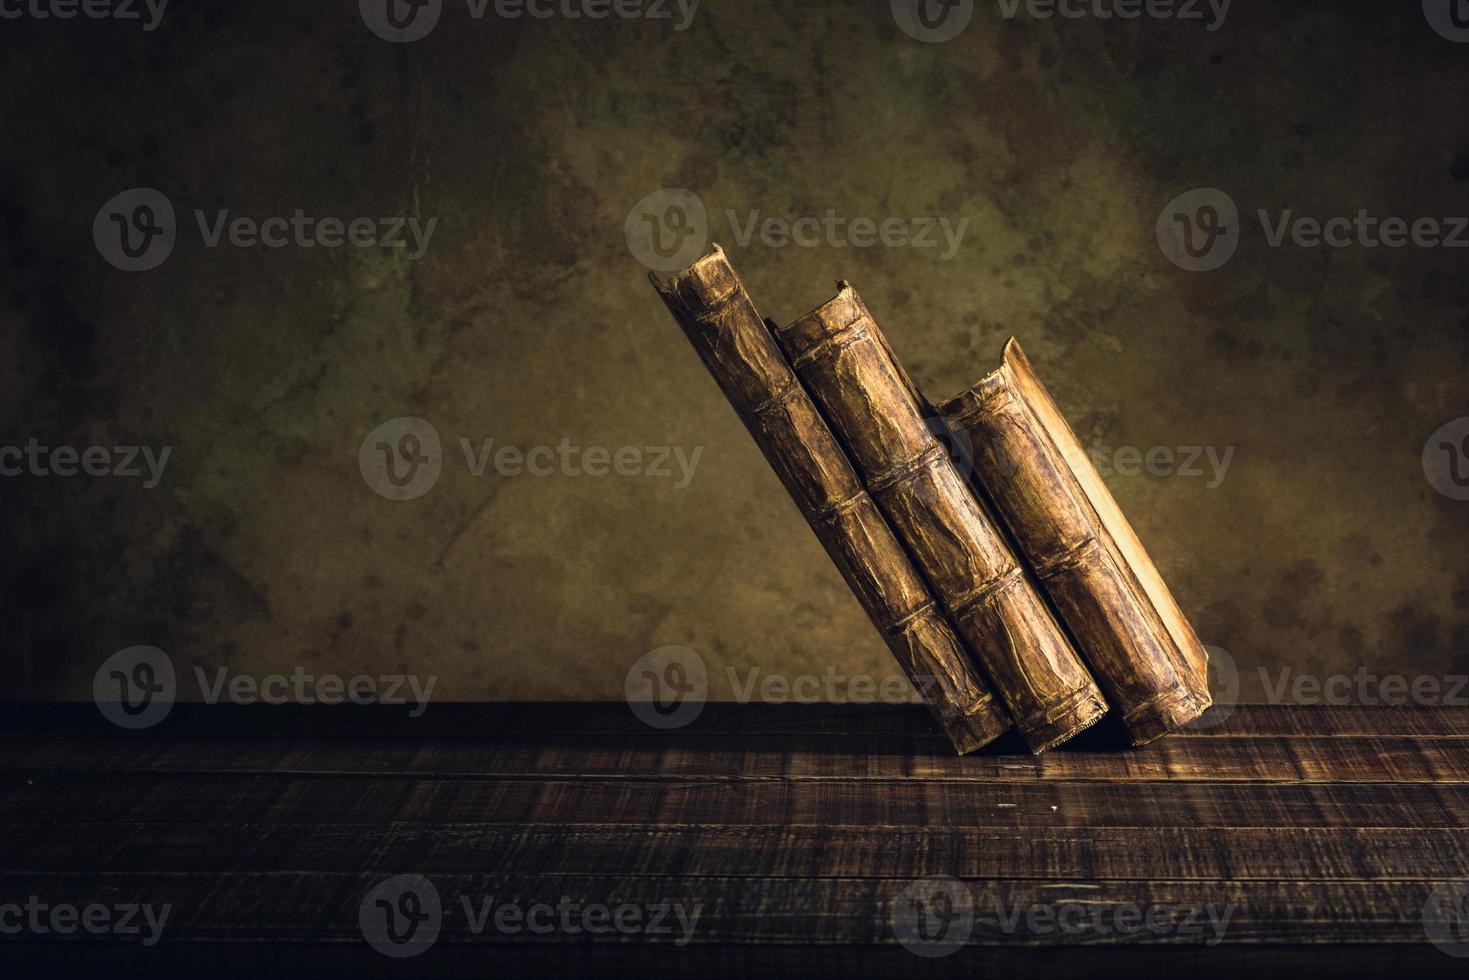 old books vintage on wood floor and paper aged background or texture photo